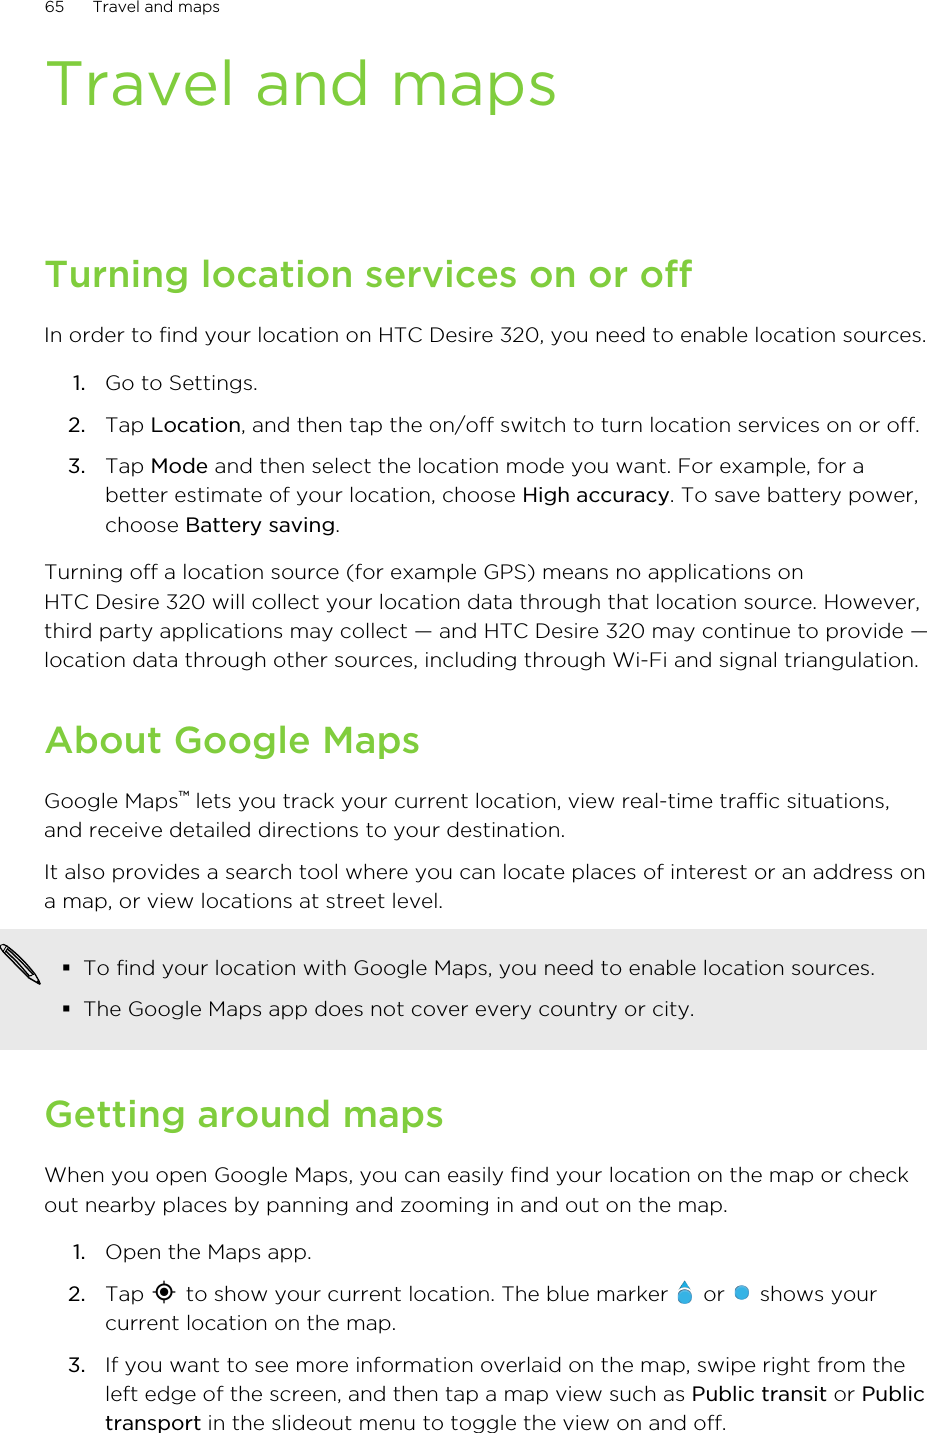 Travel and mapsTurning location services on or offIn order to find your location on HTC Desire 320, you need to enable location sources.1. Go to Settings.2. Tap Location, and then tap the on/off switch to turn location services on or off.3. Tap Mode and then select the location mode you want. For example, for abetter estimate of your location, choose High accuracy. To save battery power,choose Battery saving.Turning off a location source (for example GPS) means no applications onHTC Desire 320 will collect your location data through that location source. However,third party applications may collect — and HTC Desire 320 may continue to provide —location data through other sources, including through Wi-Fi and signal triangulation.About Google MapsGoogle Maps™ lets you track your current location, view real-time traffic situations,and receive detailed directions to your destination.It also provides a search tool where you can locate places of interest or an address ona map, or view locations at street level.§To find your location with Google Maps, you need to enable location sources.§The Google Maps app does not cover every country or city.Getting around mapsWhen you open Google Maps, you can easily find your location on the map or checkout nearby places by panning and zooming in and out on the map.1. Open the Maps app.2. Tap   to show your current location. The blue marker   or   shows yourcurrent location on the map.3. If you want to see more information overlaid on the map, swipe right from theleft edge of the screen, and then tap a map view such as Public transit or Publictransport in the slideout menu to toggle the view on and off.65 Travel and maps